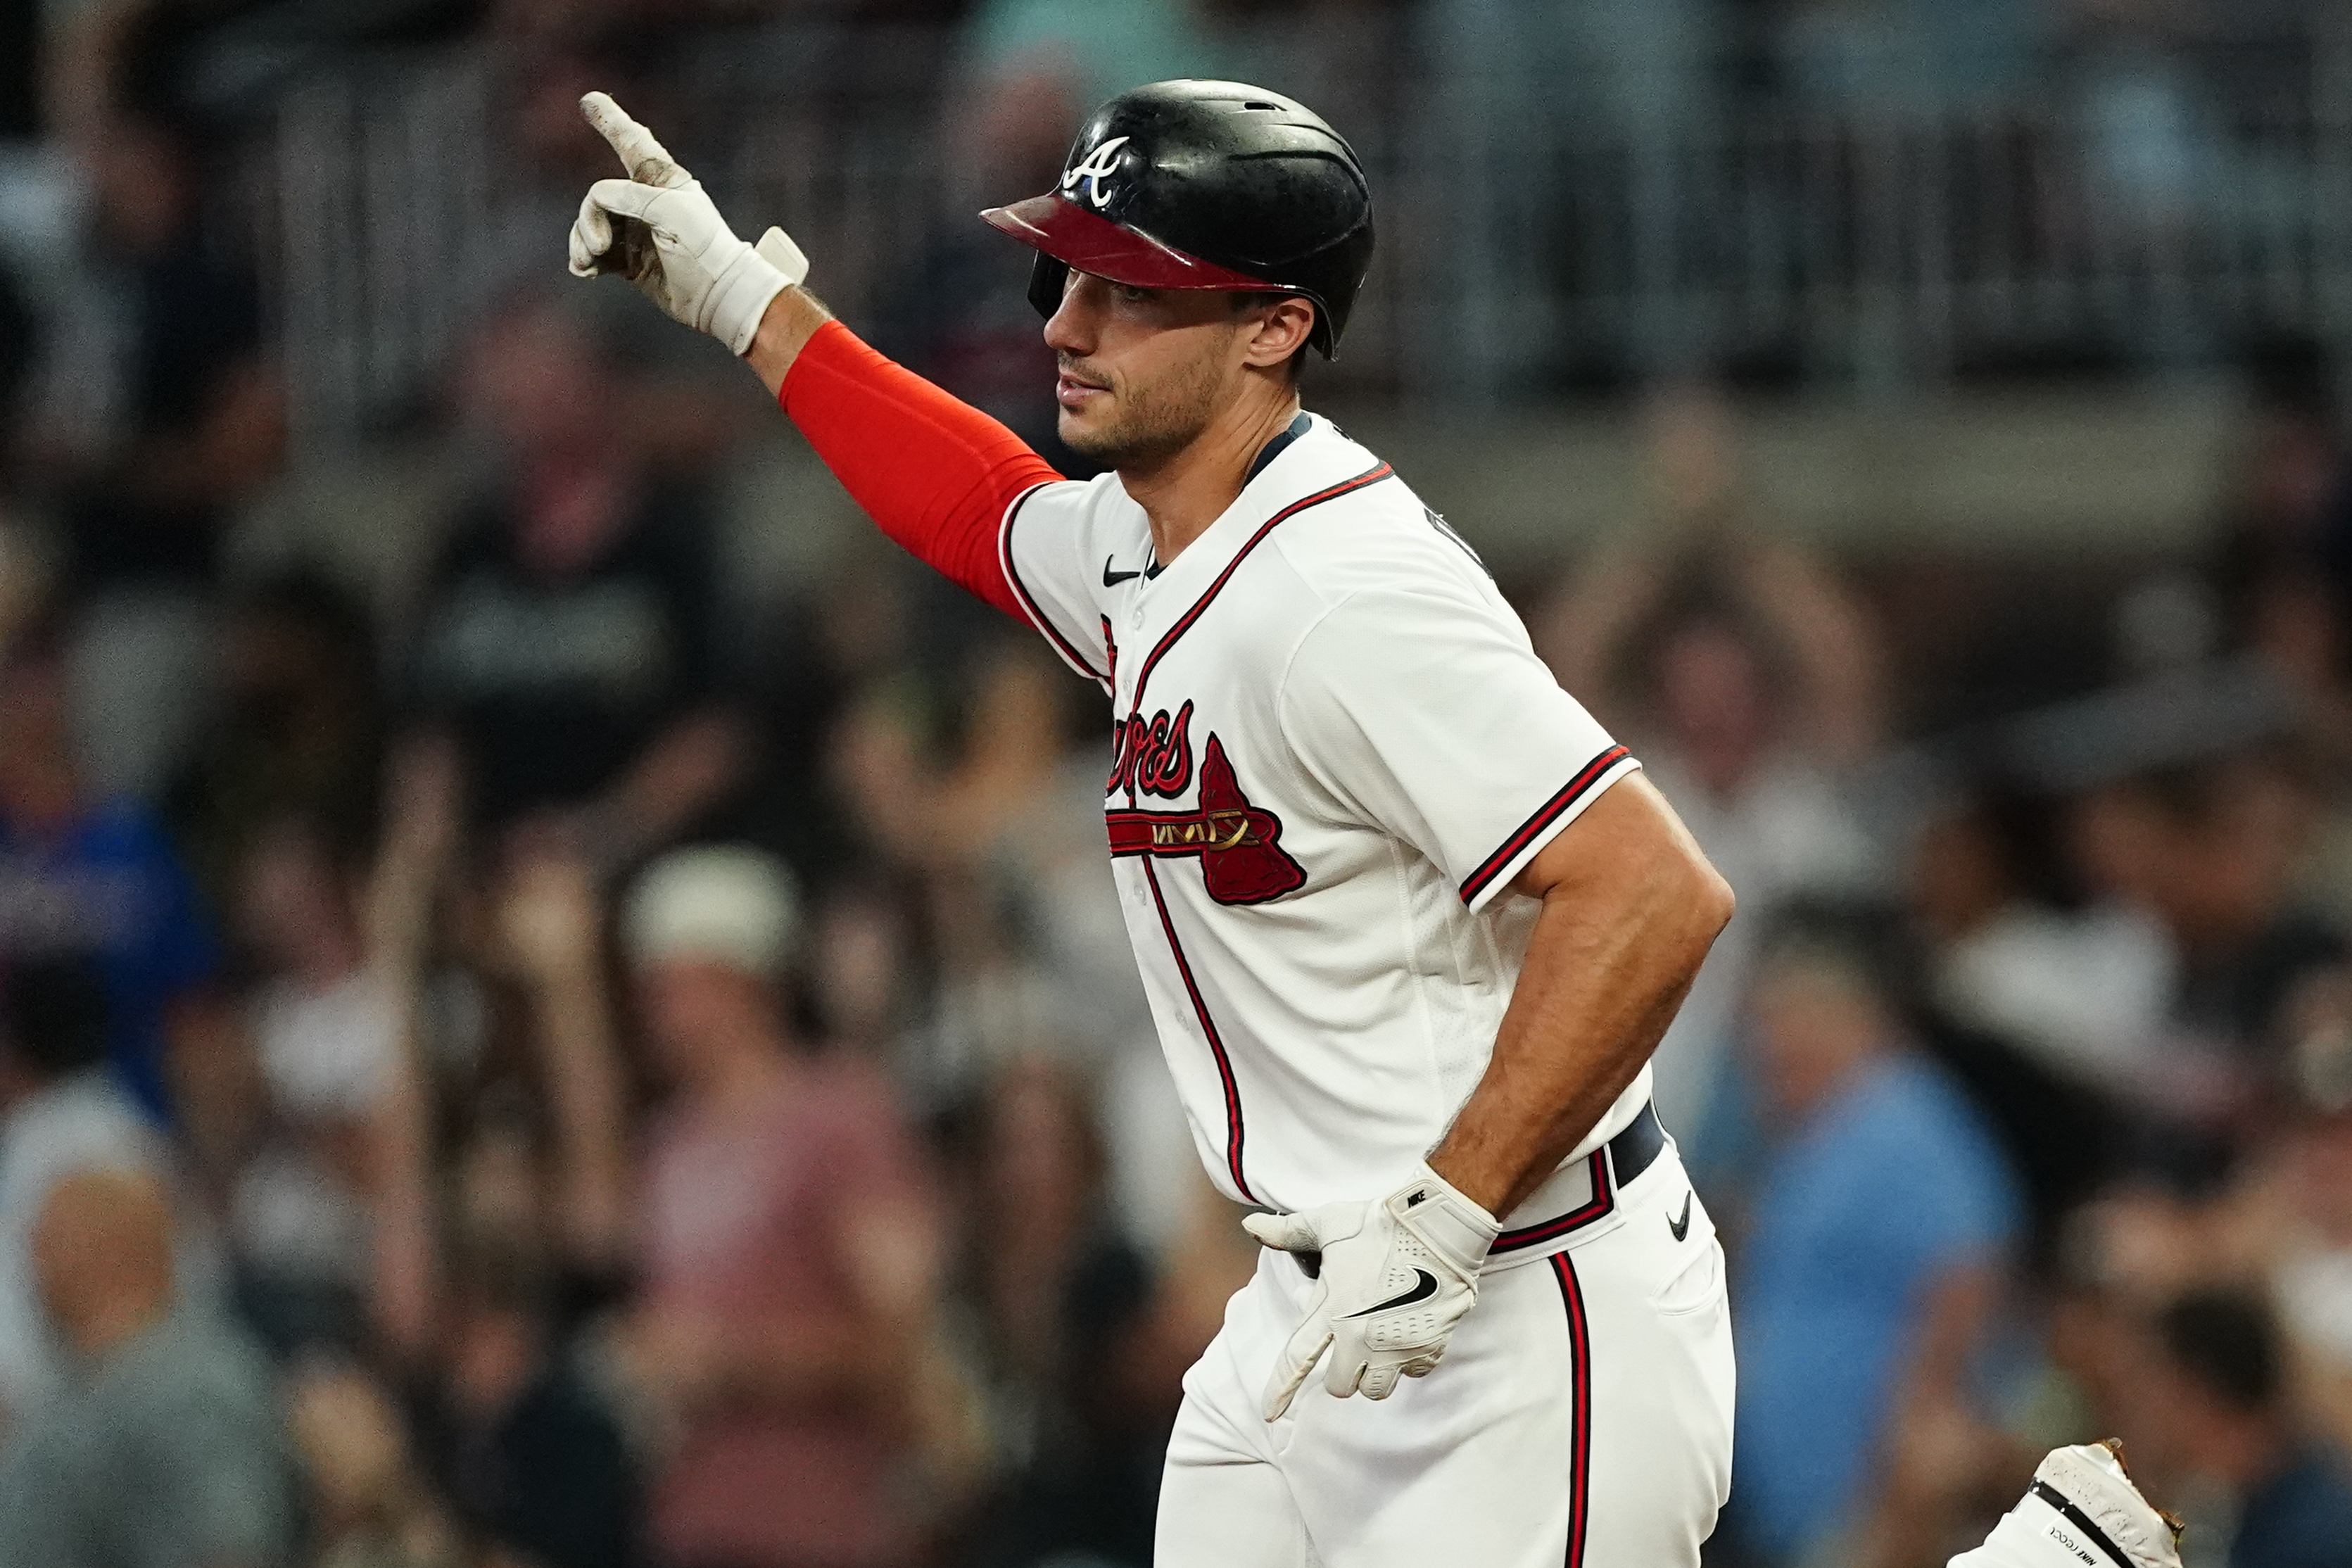 Former GM regrets trading Dansby Swanson to Braves